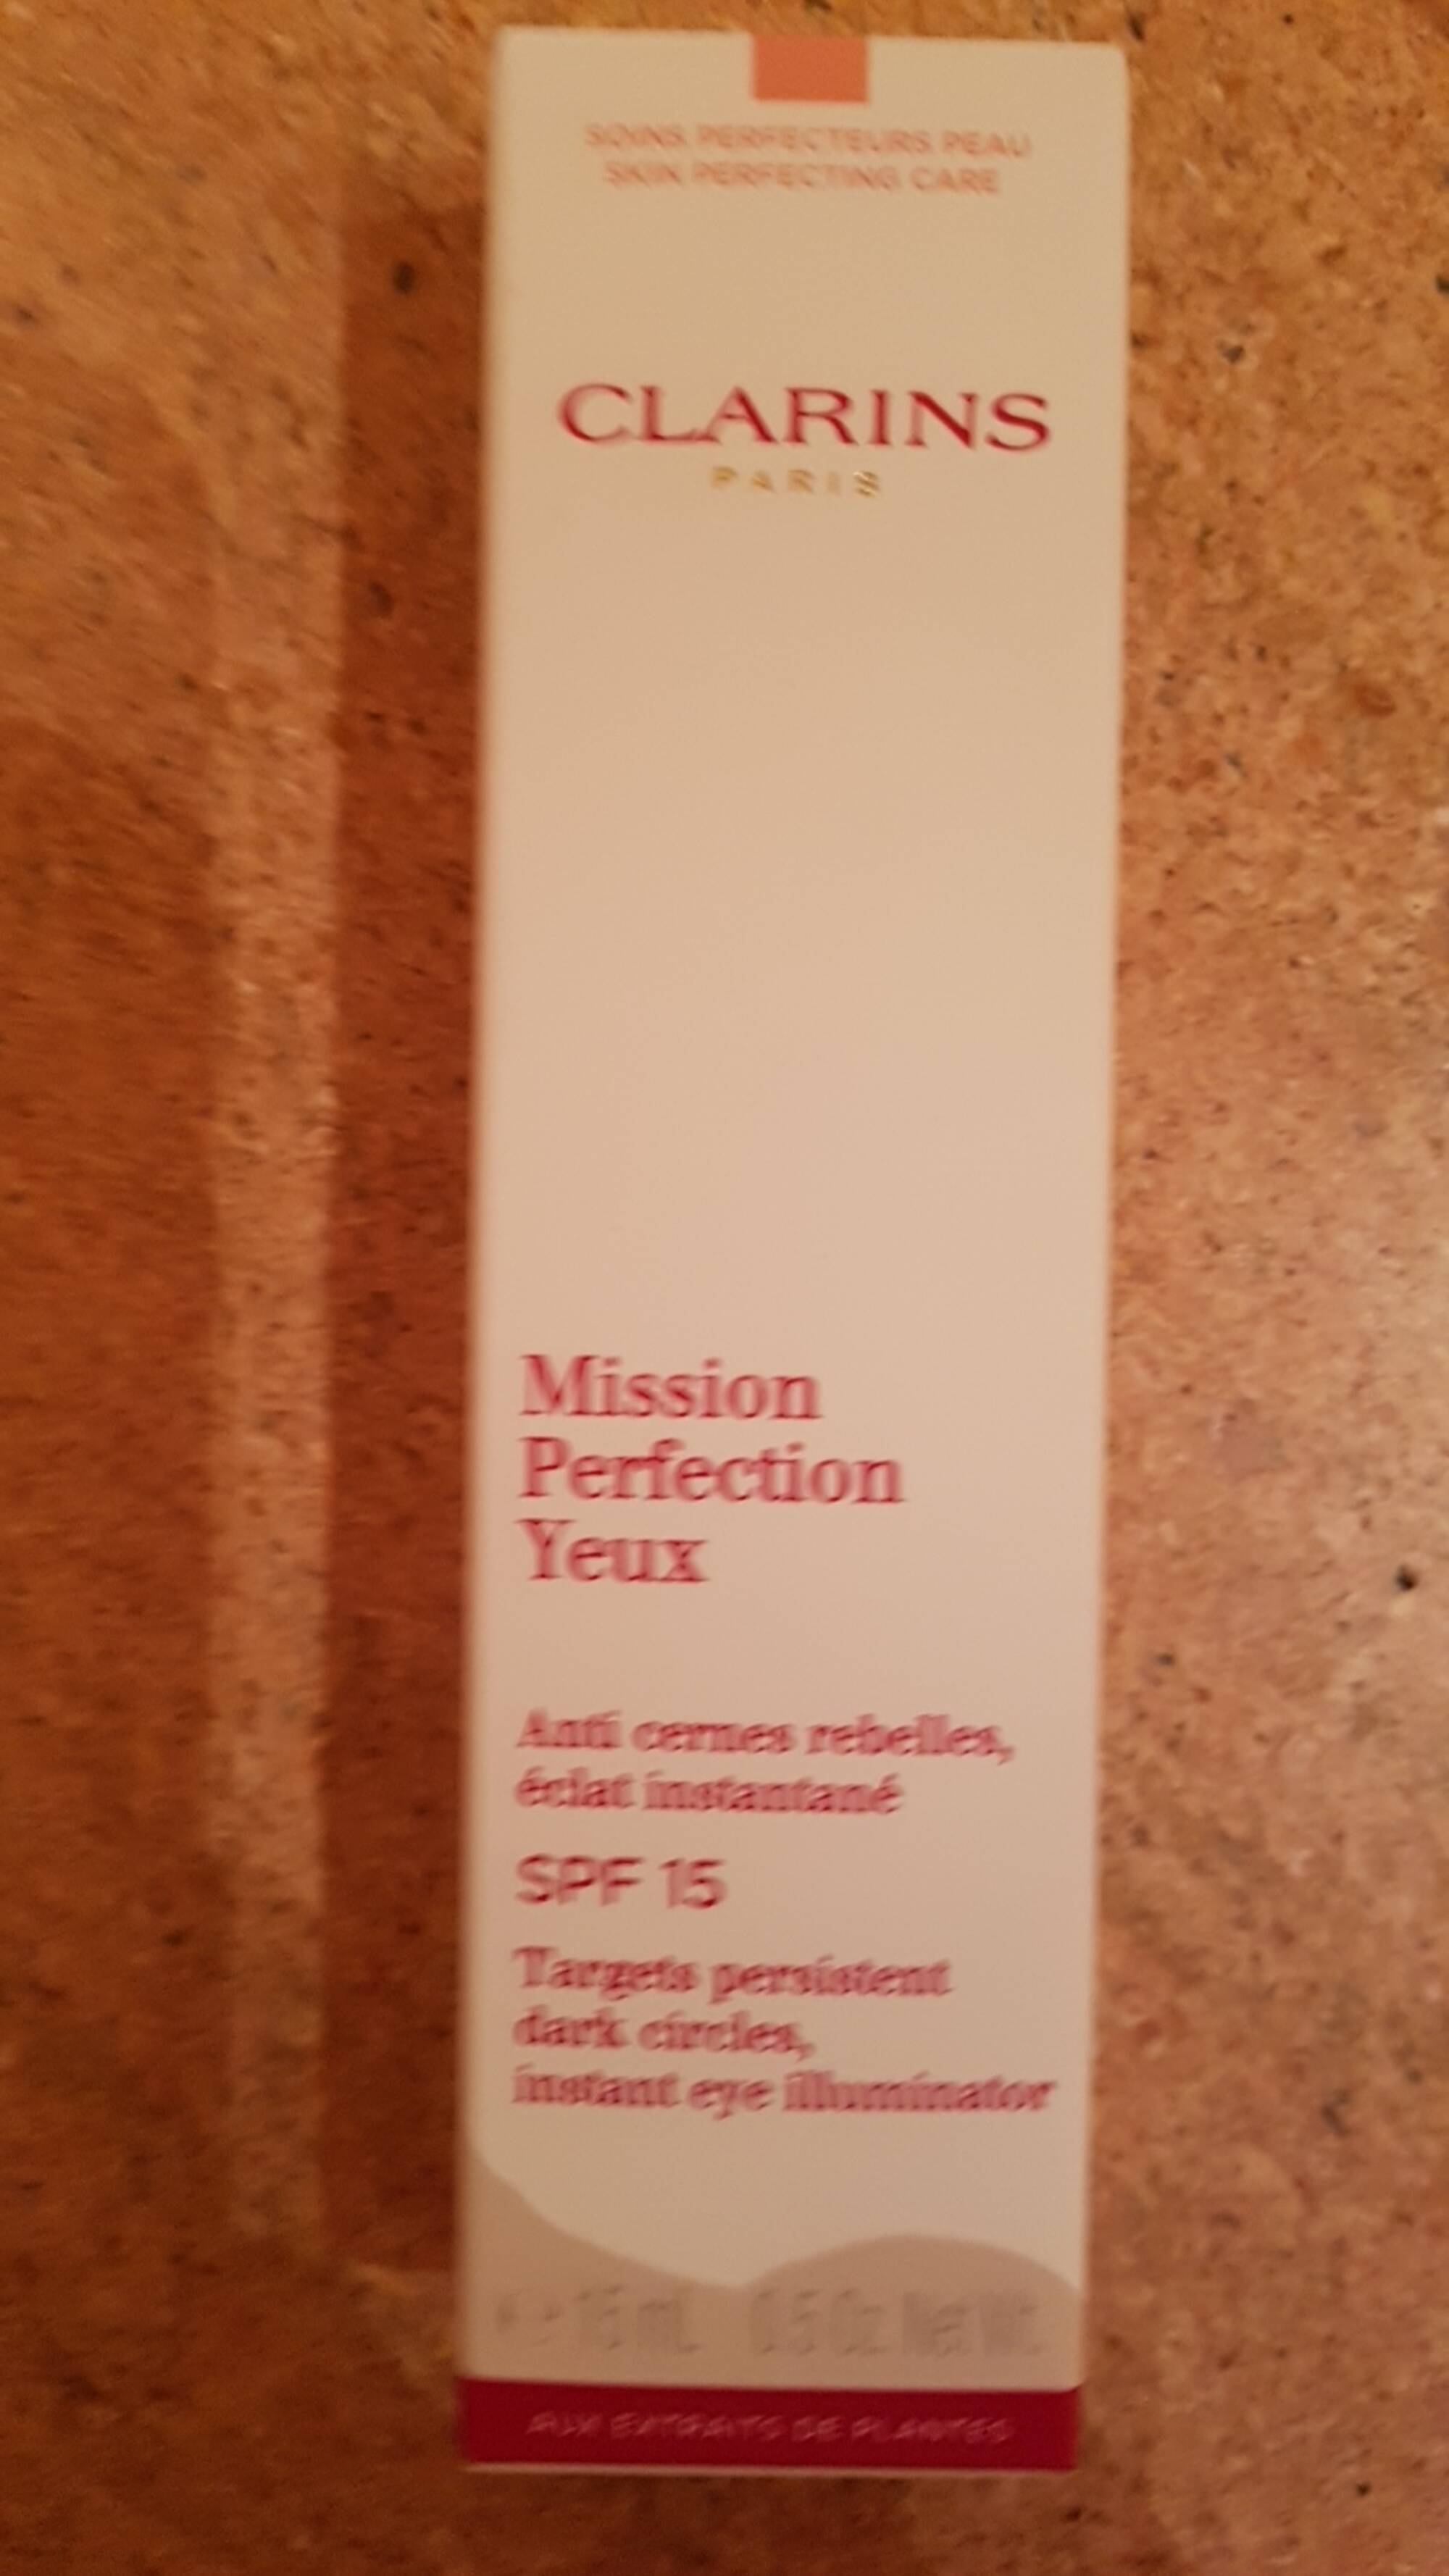 CLARINS - Mission perfection yeux - Anti-cernes SPF 15